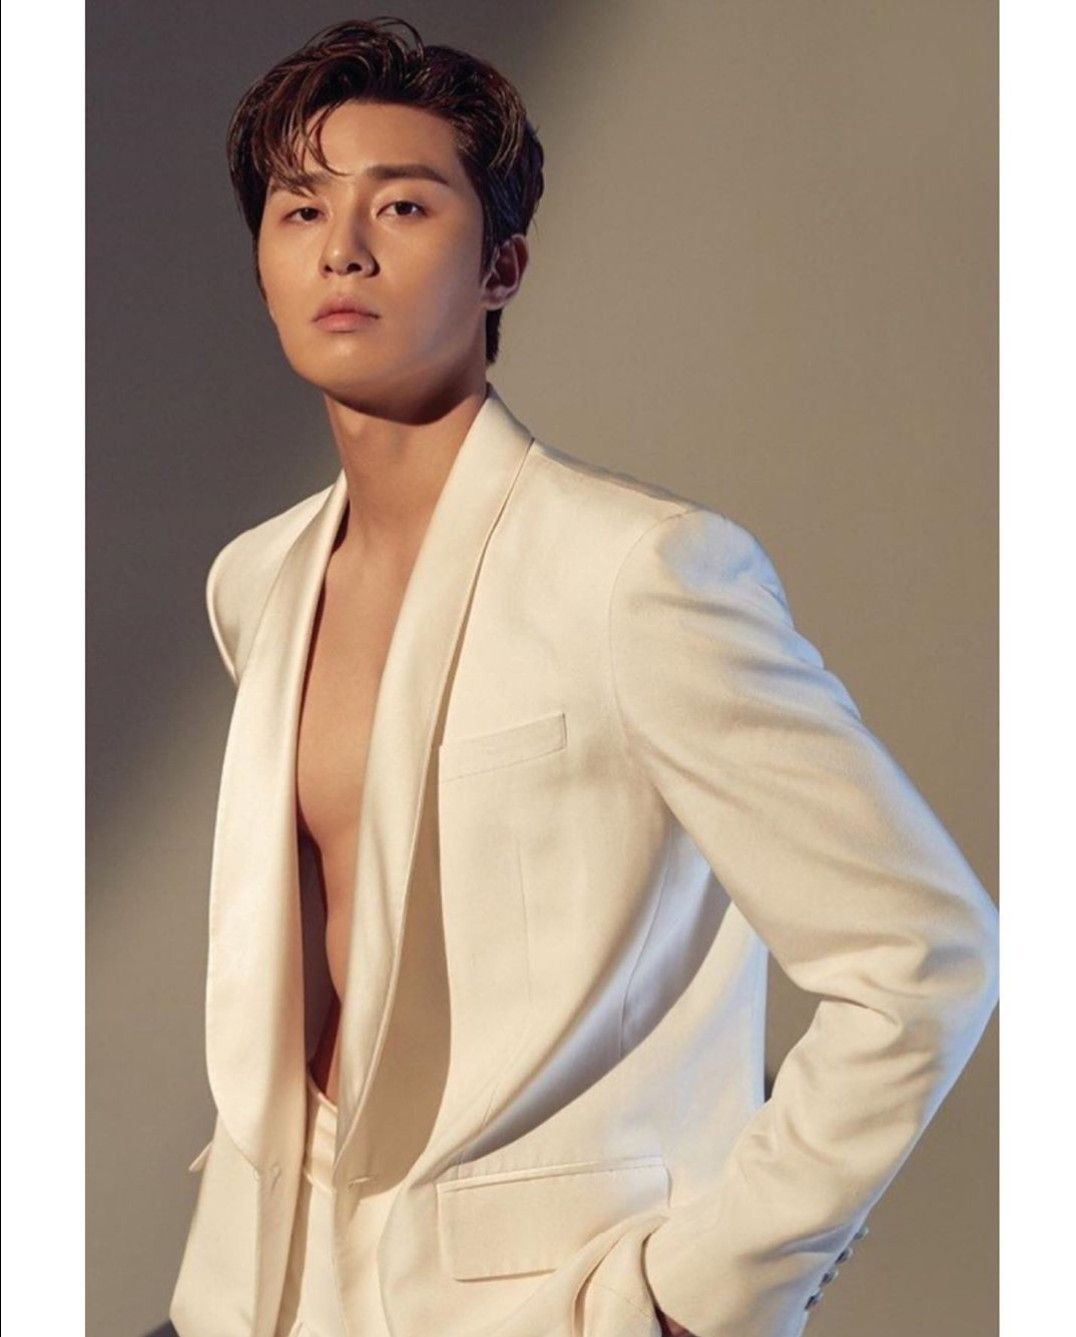 park-seo-joon-revealed-to-have-bought-6-floor-building-worth-11-billion-won-this-year-2